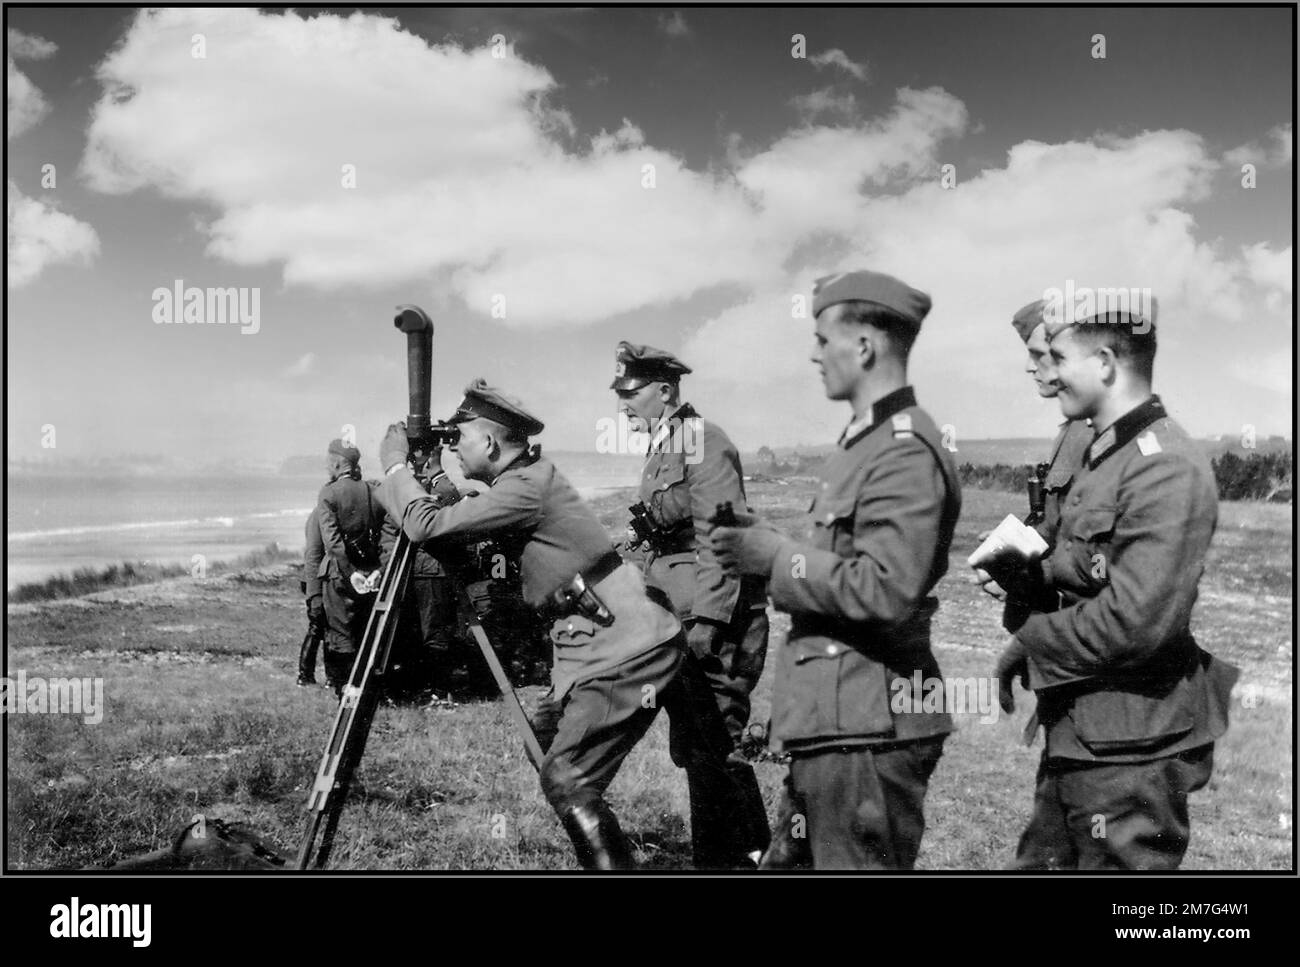 D-DAY INVASION German Wehrmacht Army officers survey the Normandy beaches near French towns of Granville and Saint-Pair-sur-Mer shortly before the Allied invasions in 1944 Nazi Wehrmacht army soldiers and officers surveying the coast using trench binoculars to appraise enemy invasion ahead. 1940s World War II Stock Photo